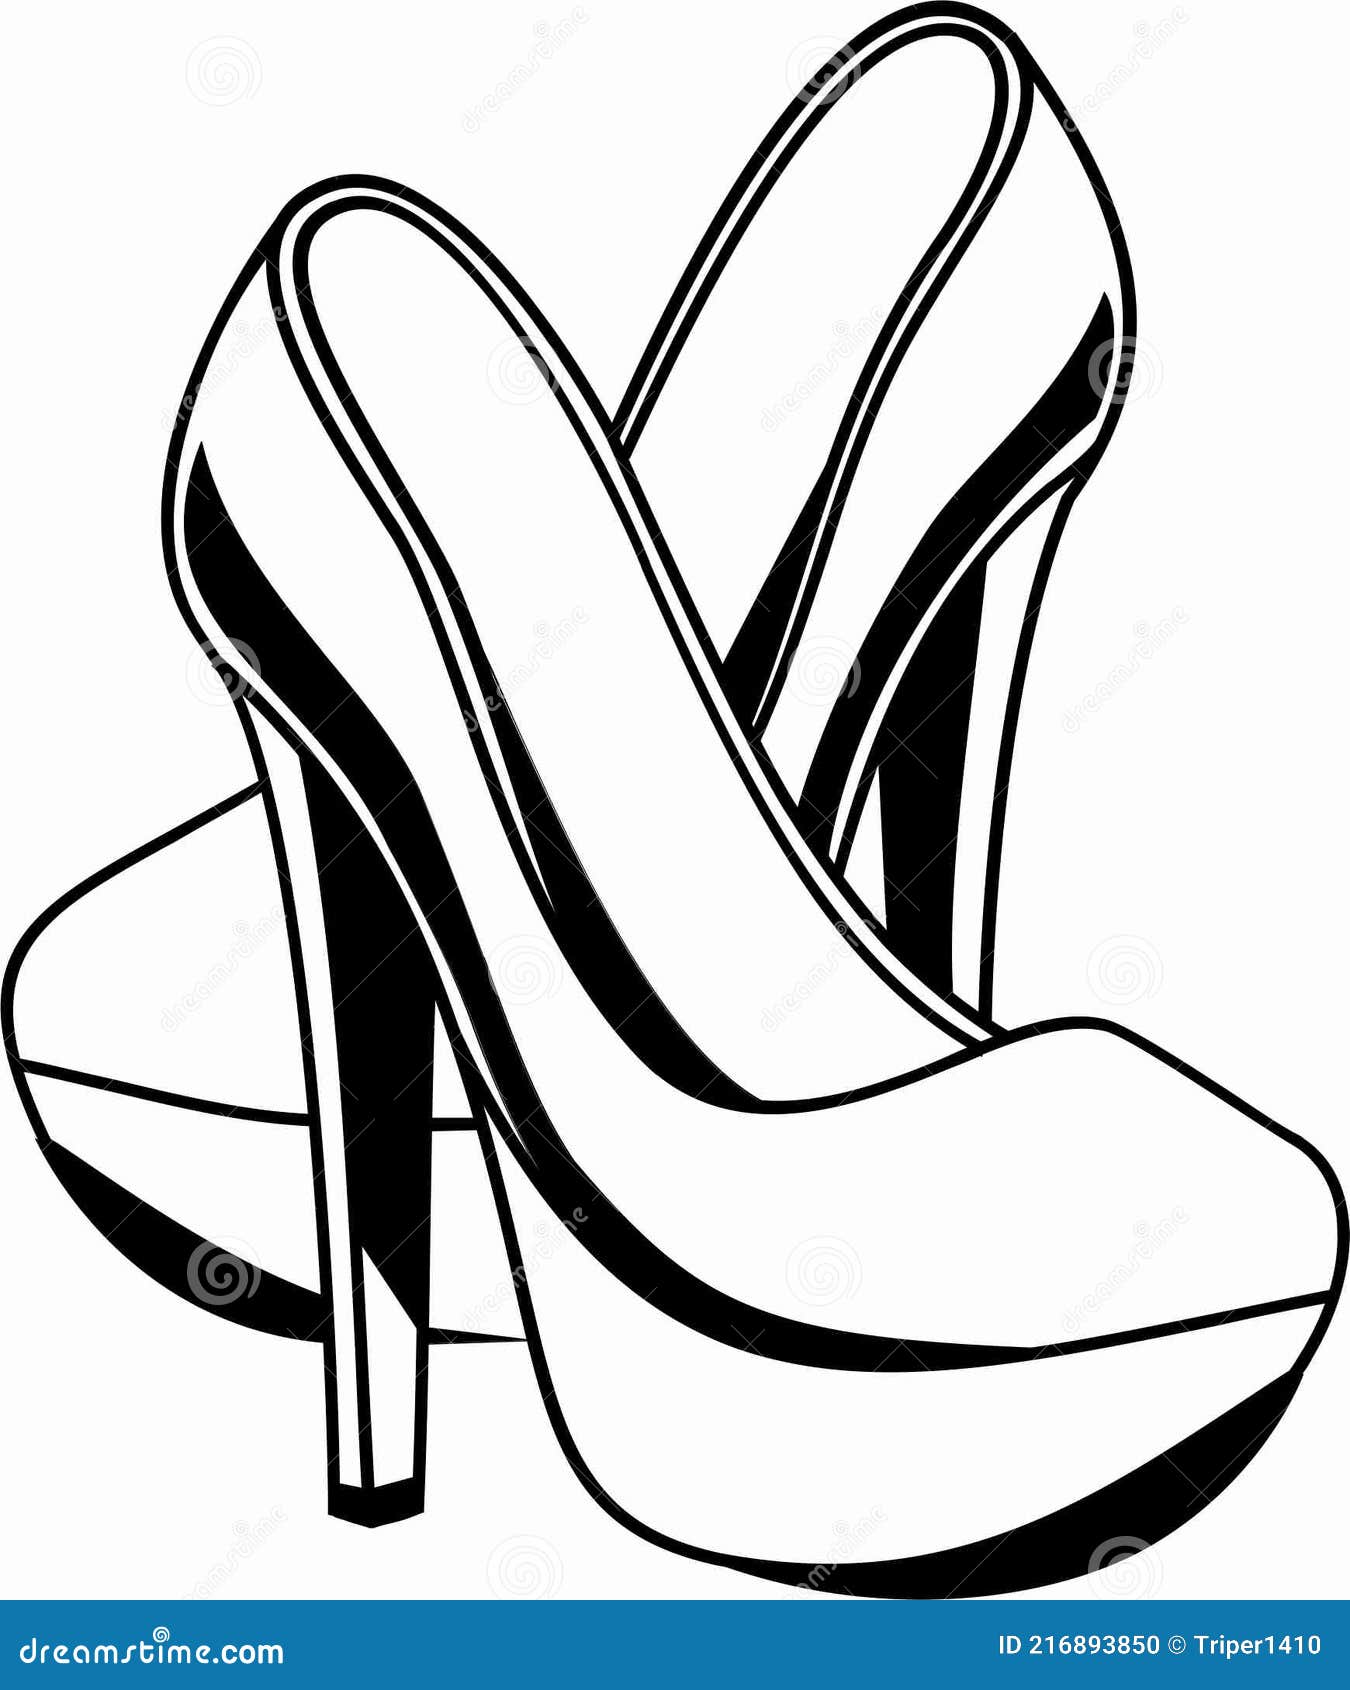 Vector girls in high heels. Fashion illustration. Female legs in shoes.  Cute design. Trendy picture in vogue style. Fashionable women. Stylish  ladies. #8 Digital Art by Dean Zangirolami - Pixels